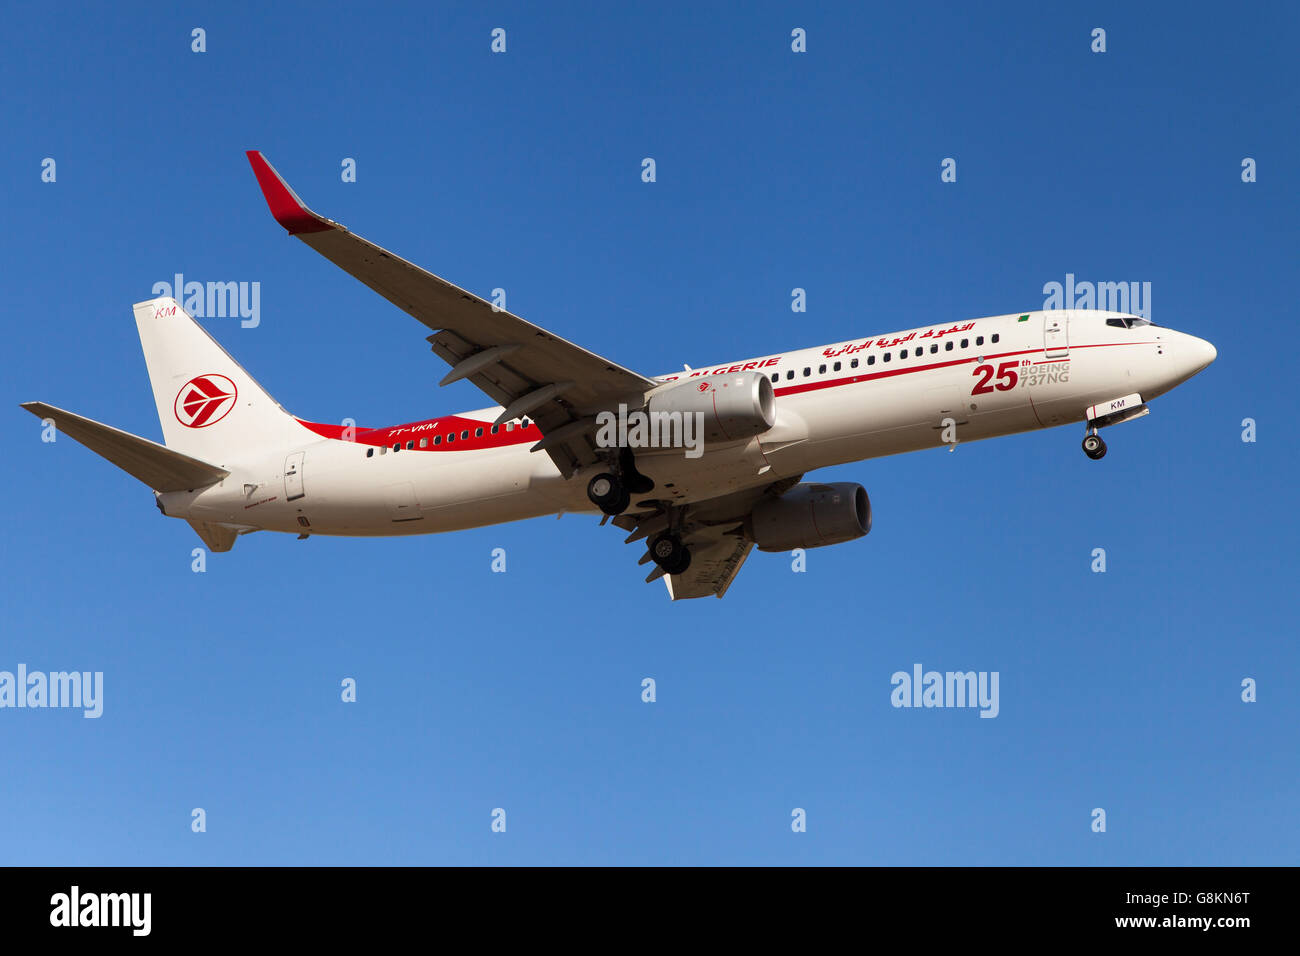 An Air Algerie Boeing 737-800 approaching to El Prat Airport in Barcelona, Spain. Stock Photo